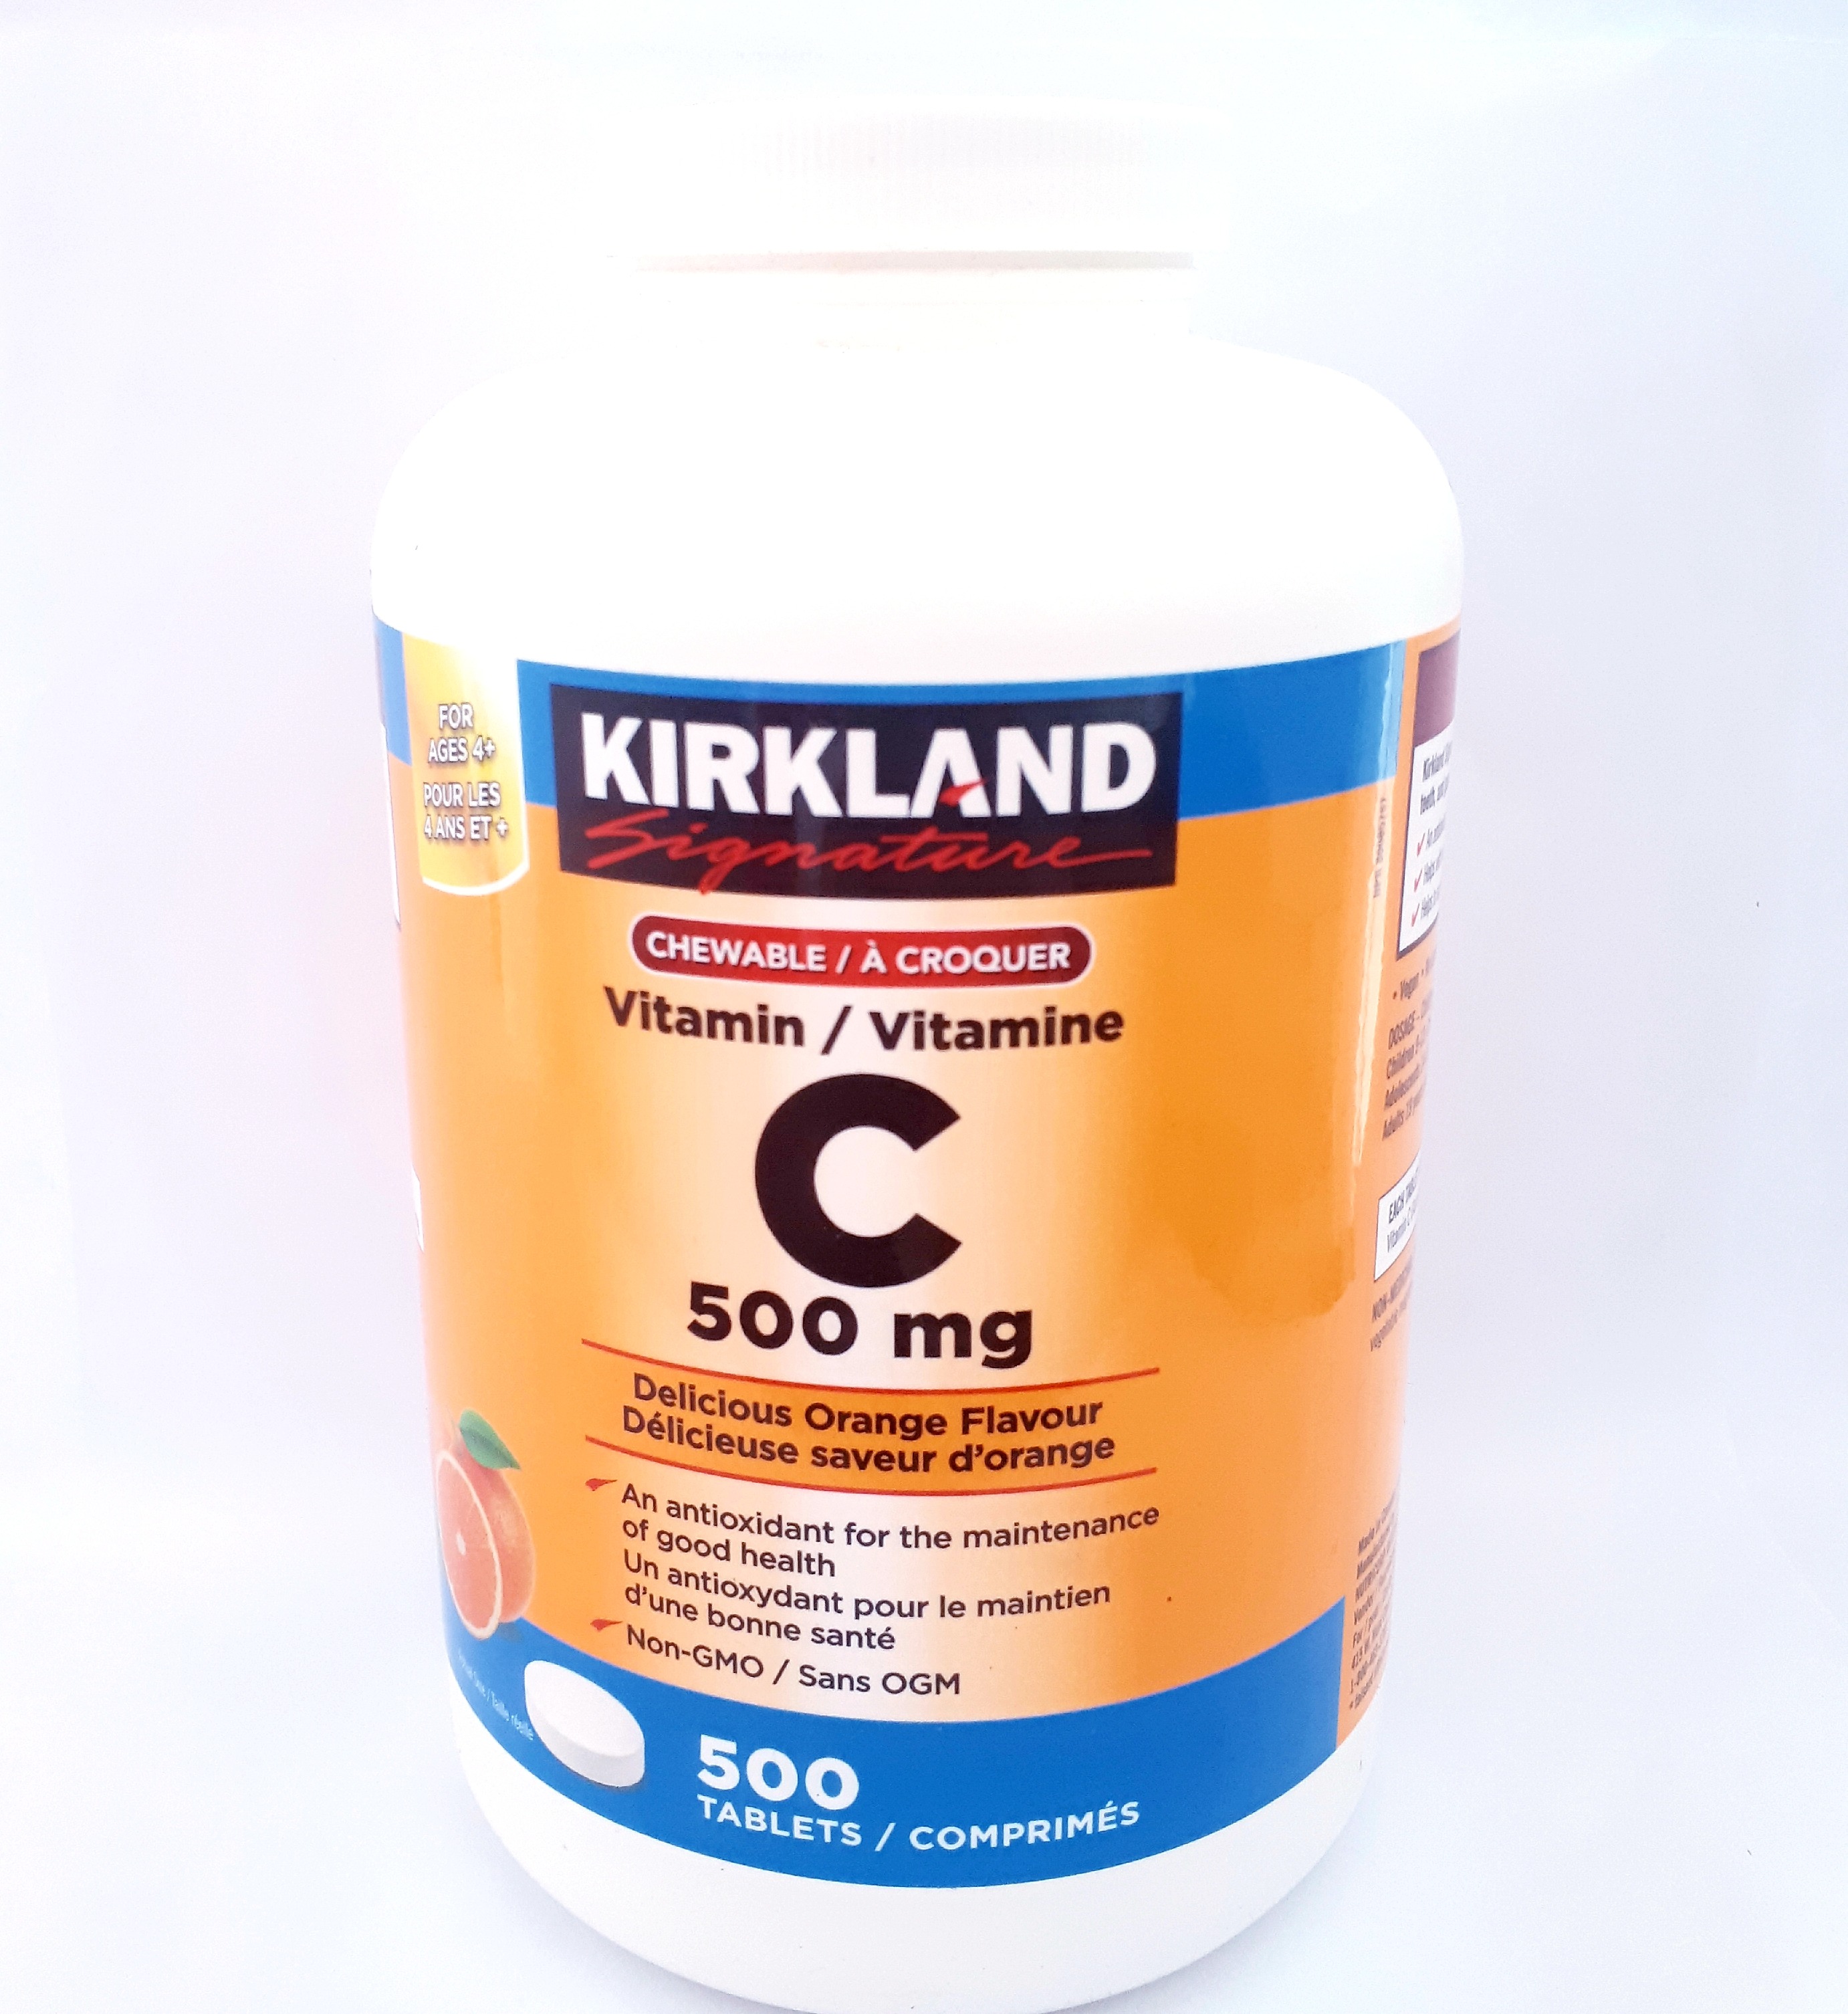 Kirkland Signature Chewable Vitamin C 500 Mg 500 Tablets From Canada Expiry Date 1 23 With Free 3 Sticks Of Immuniplus Traditional Herbal Drink Ready To Drink Expiry Date 6 23 Lazada Ph